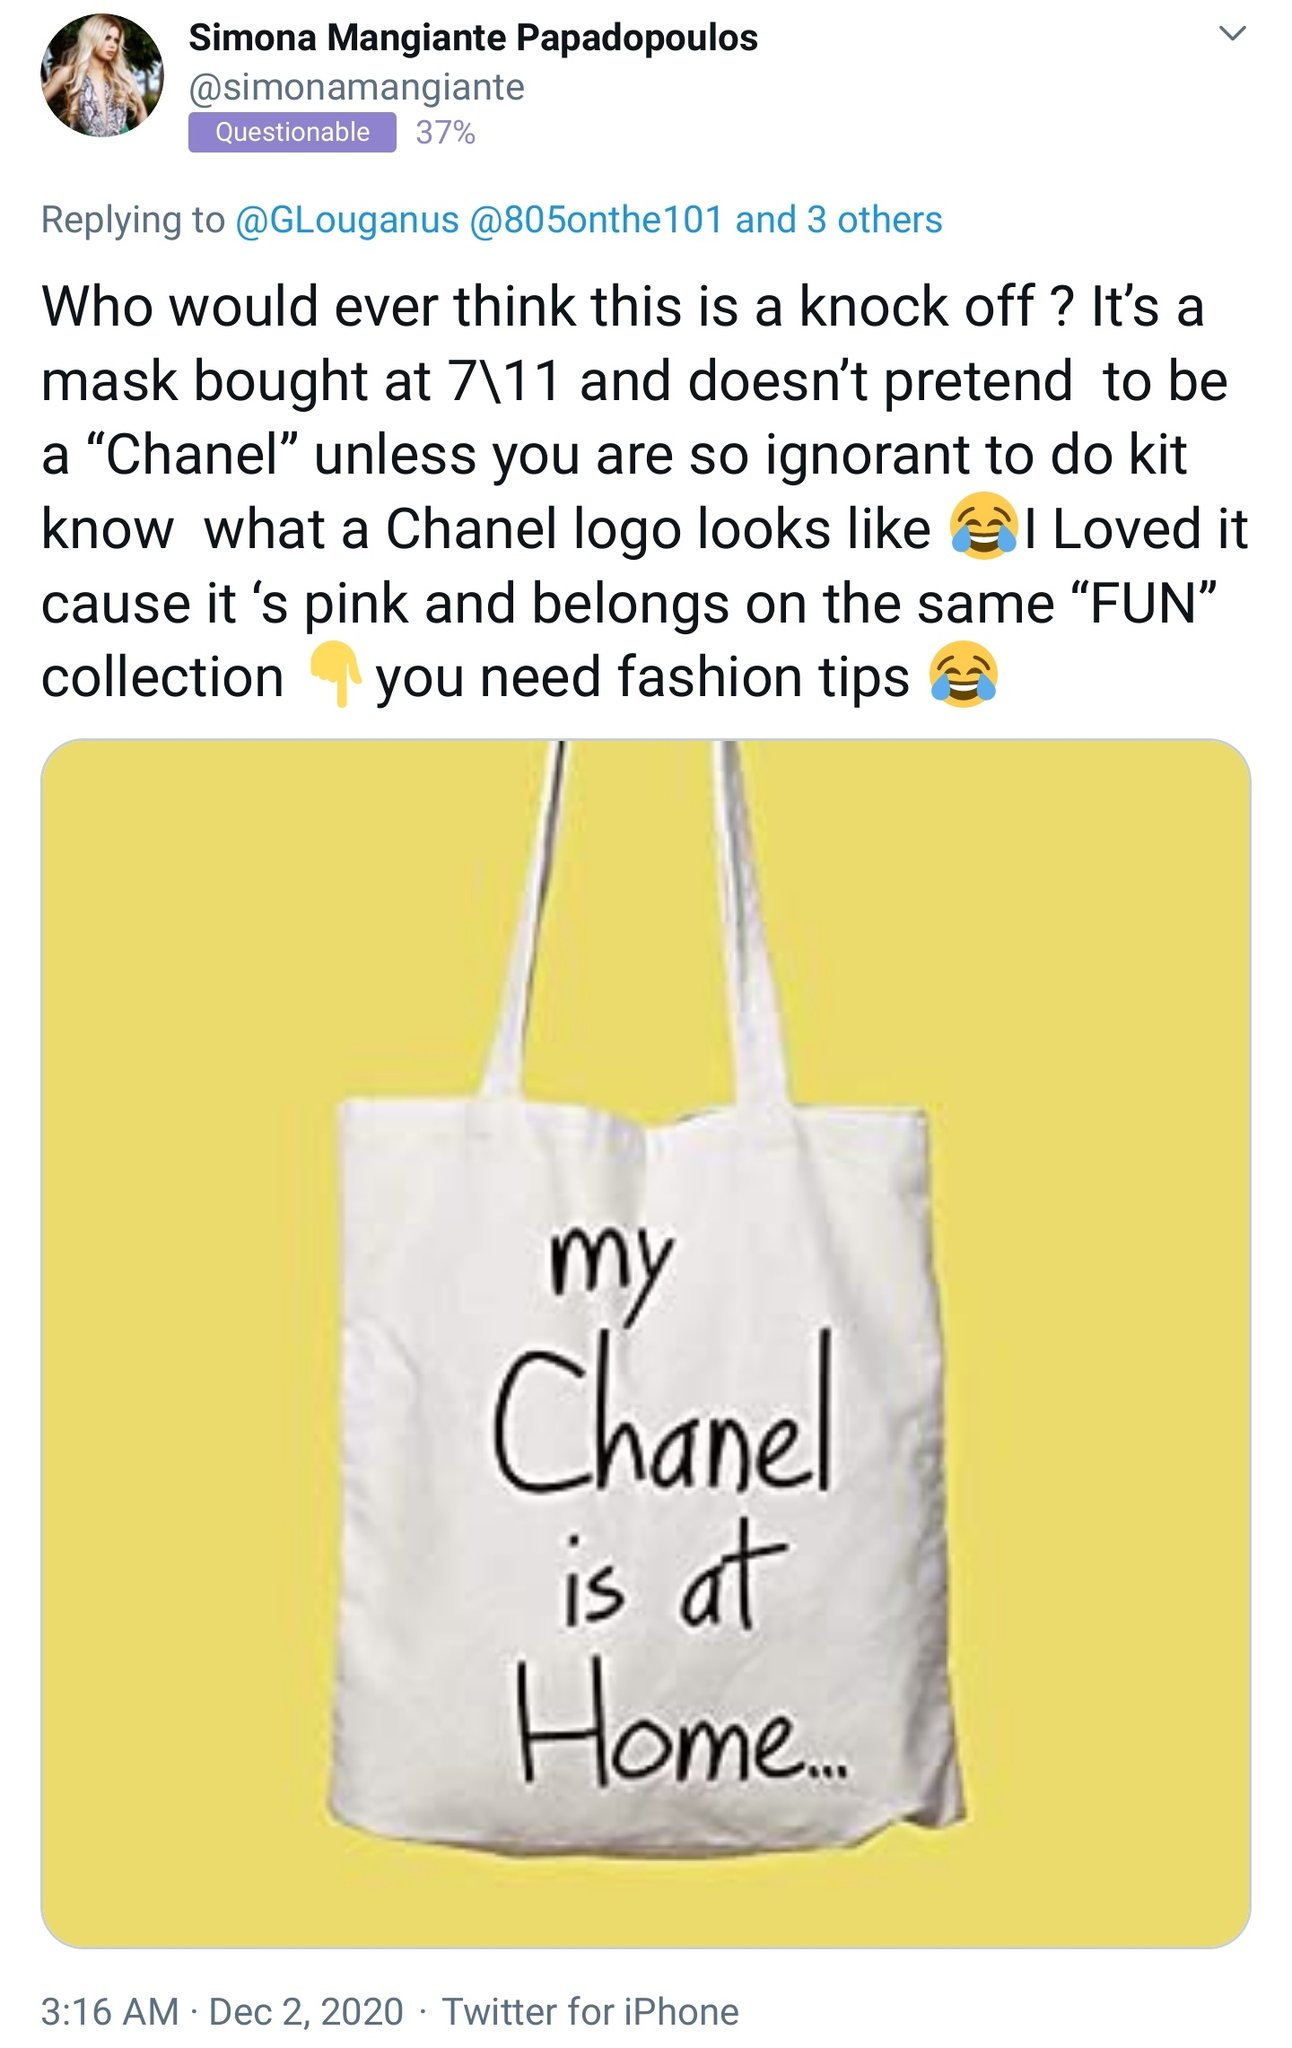 Christopher Bouzy (spoutible.com/cbouzy) on X: The faux Chanel mask with  the Chanel logo isn't trying to pretend to be Chanel? What?🤦🏾‍♂️😂   / X